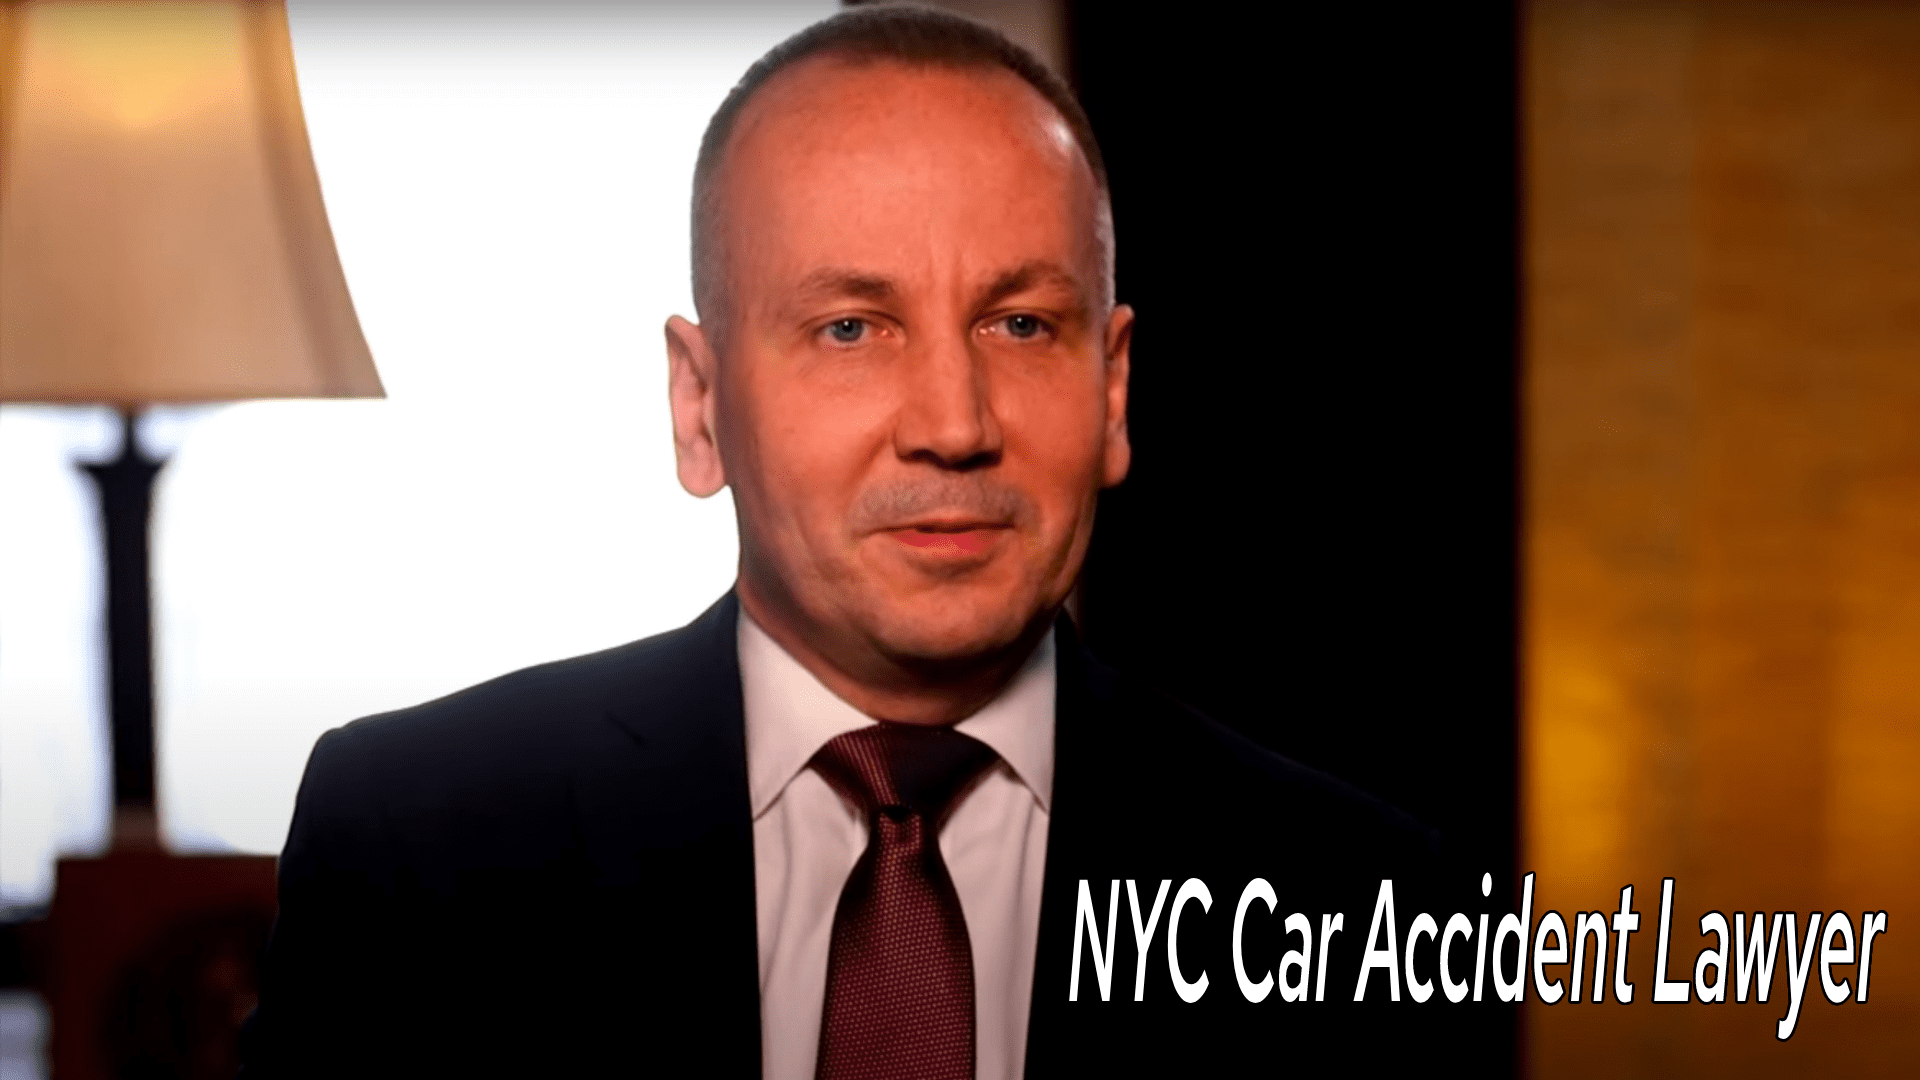 NYC Car Accident Lawyer Video